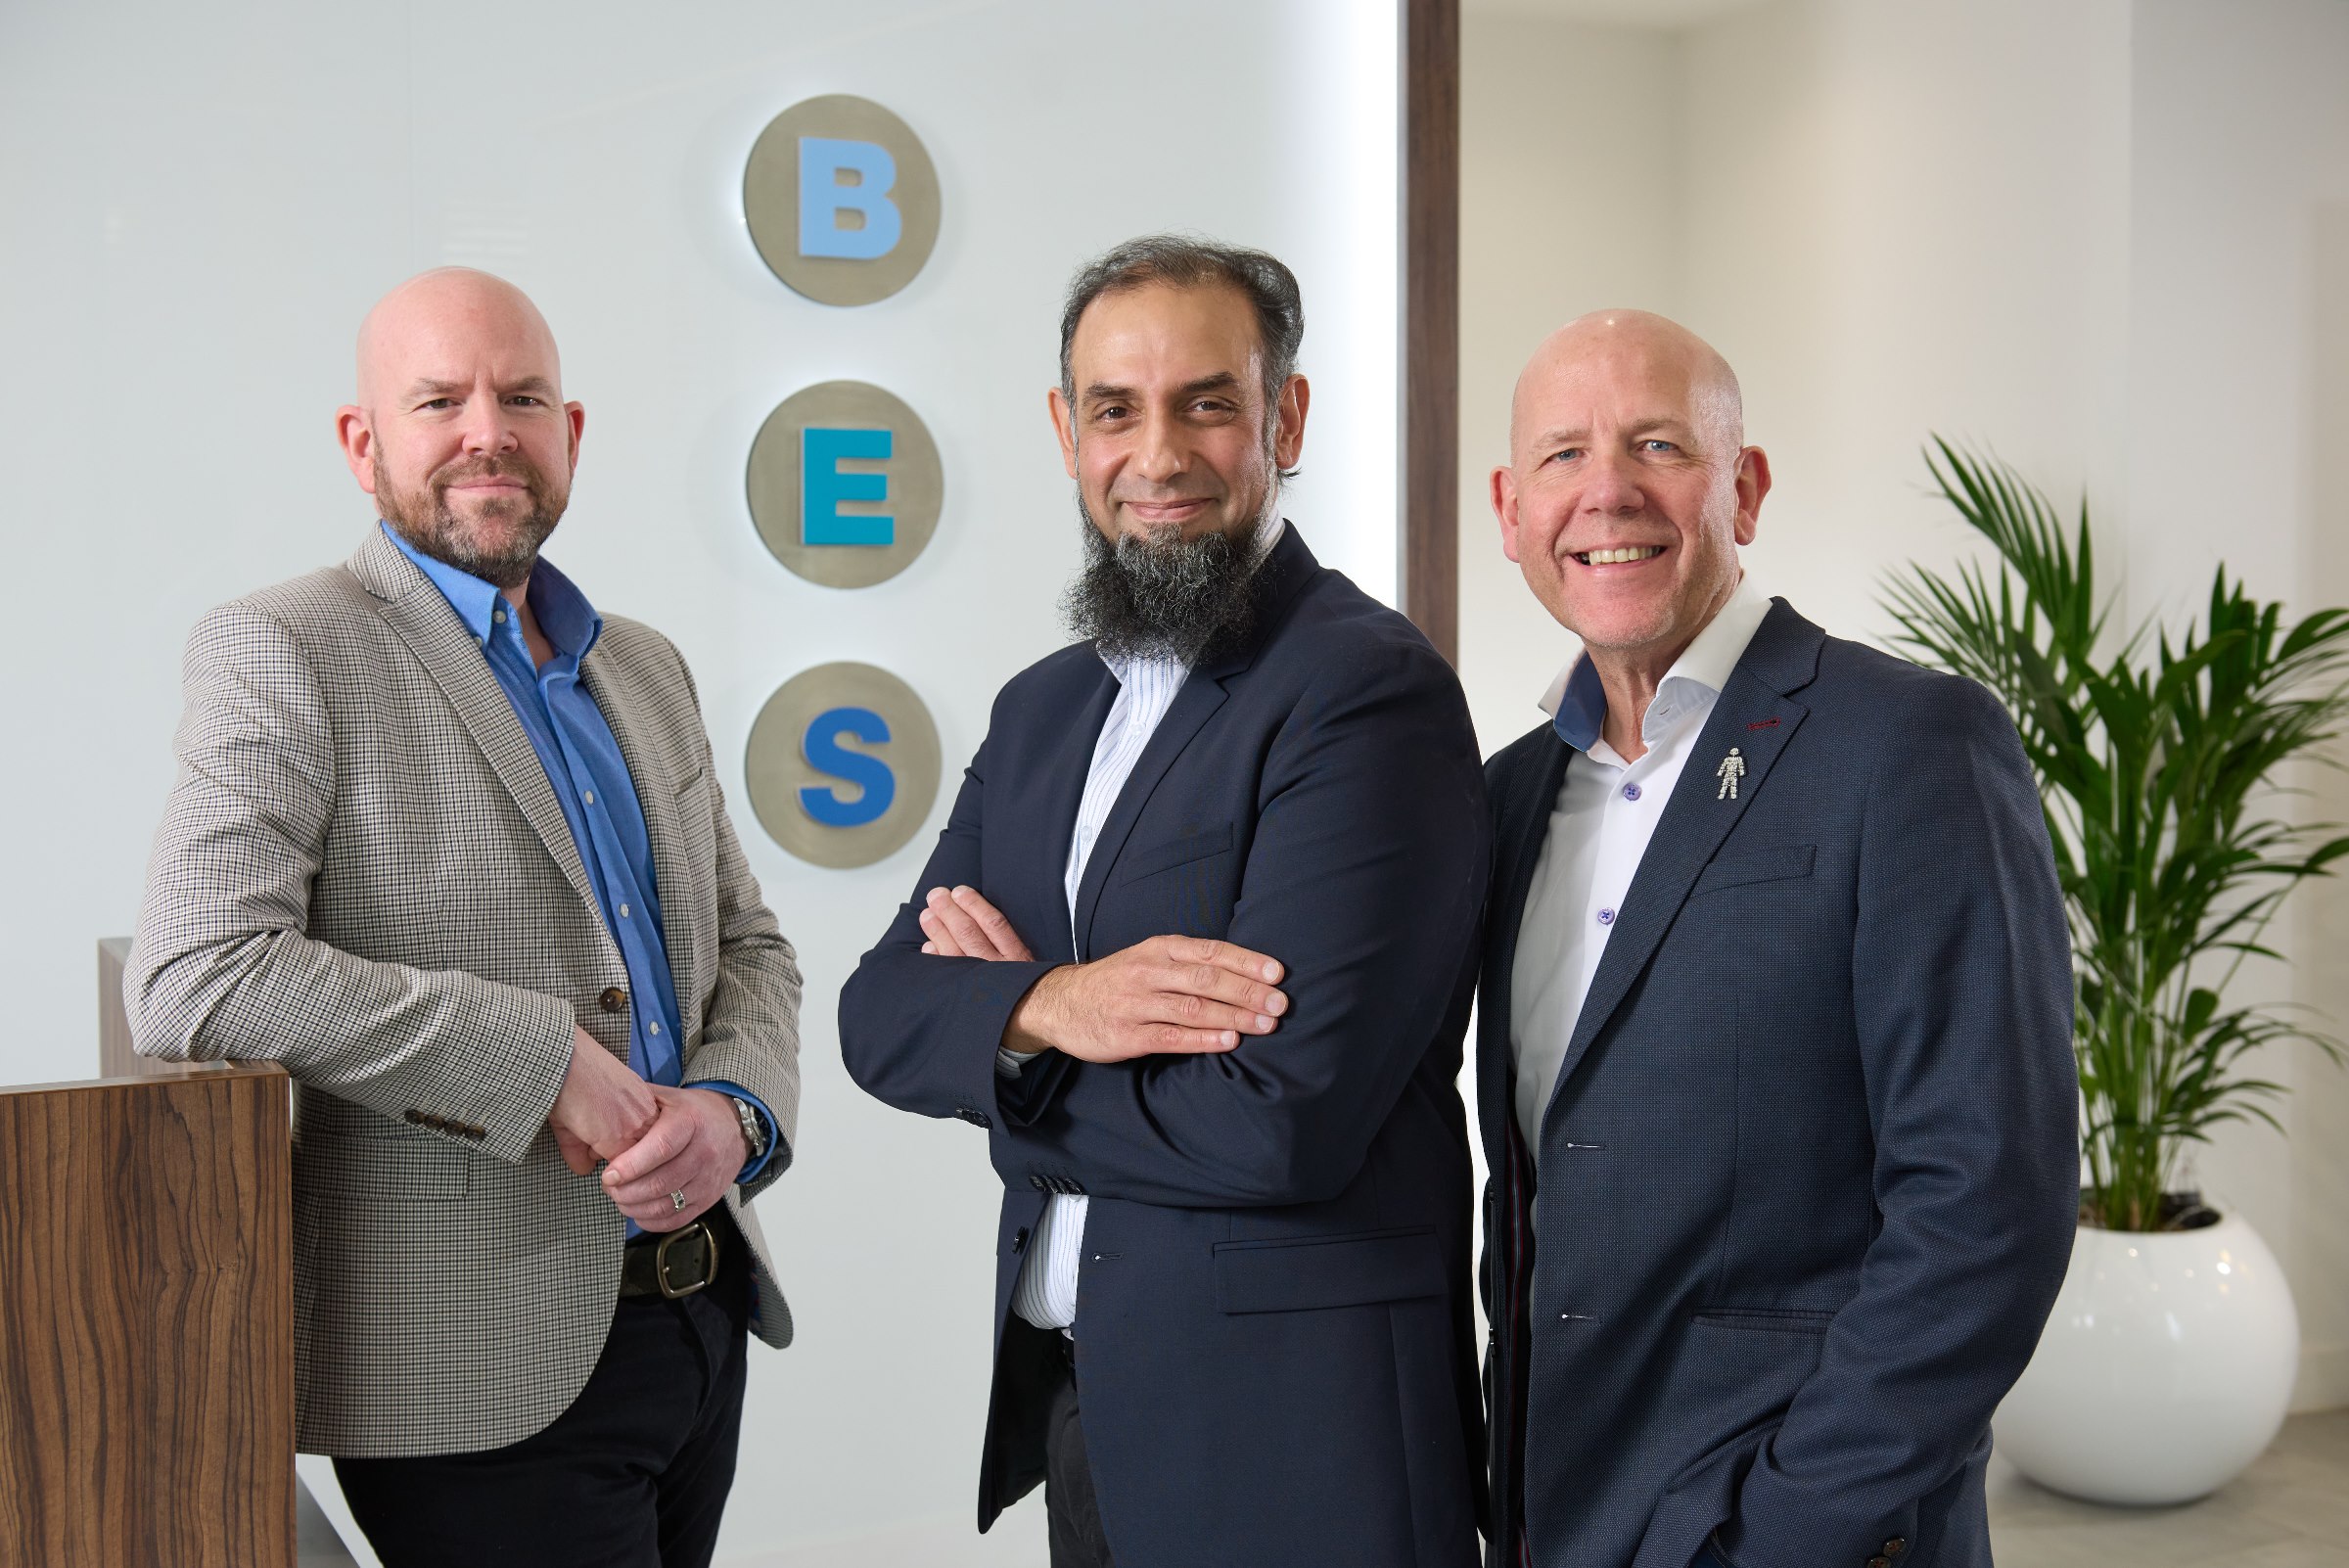 Image: BES marks 20 years in business with landmark CEO appointment